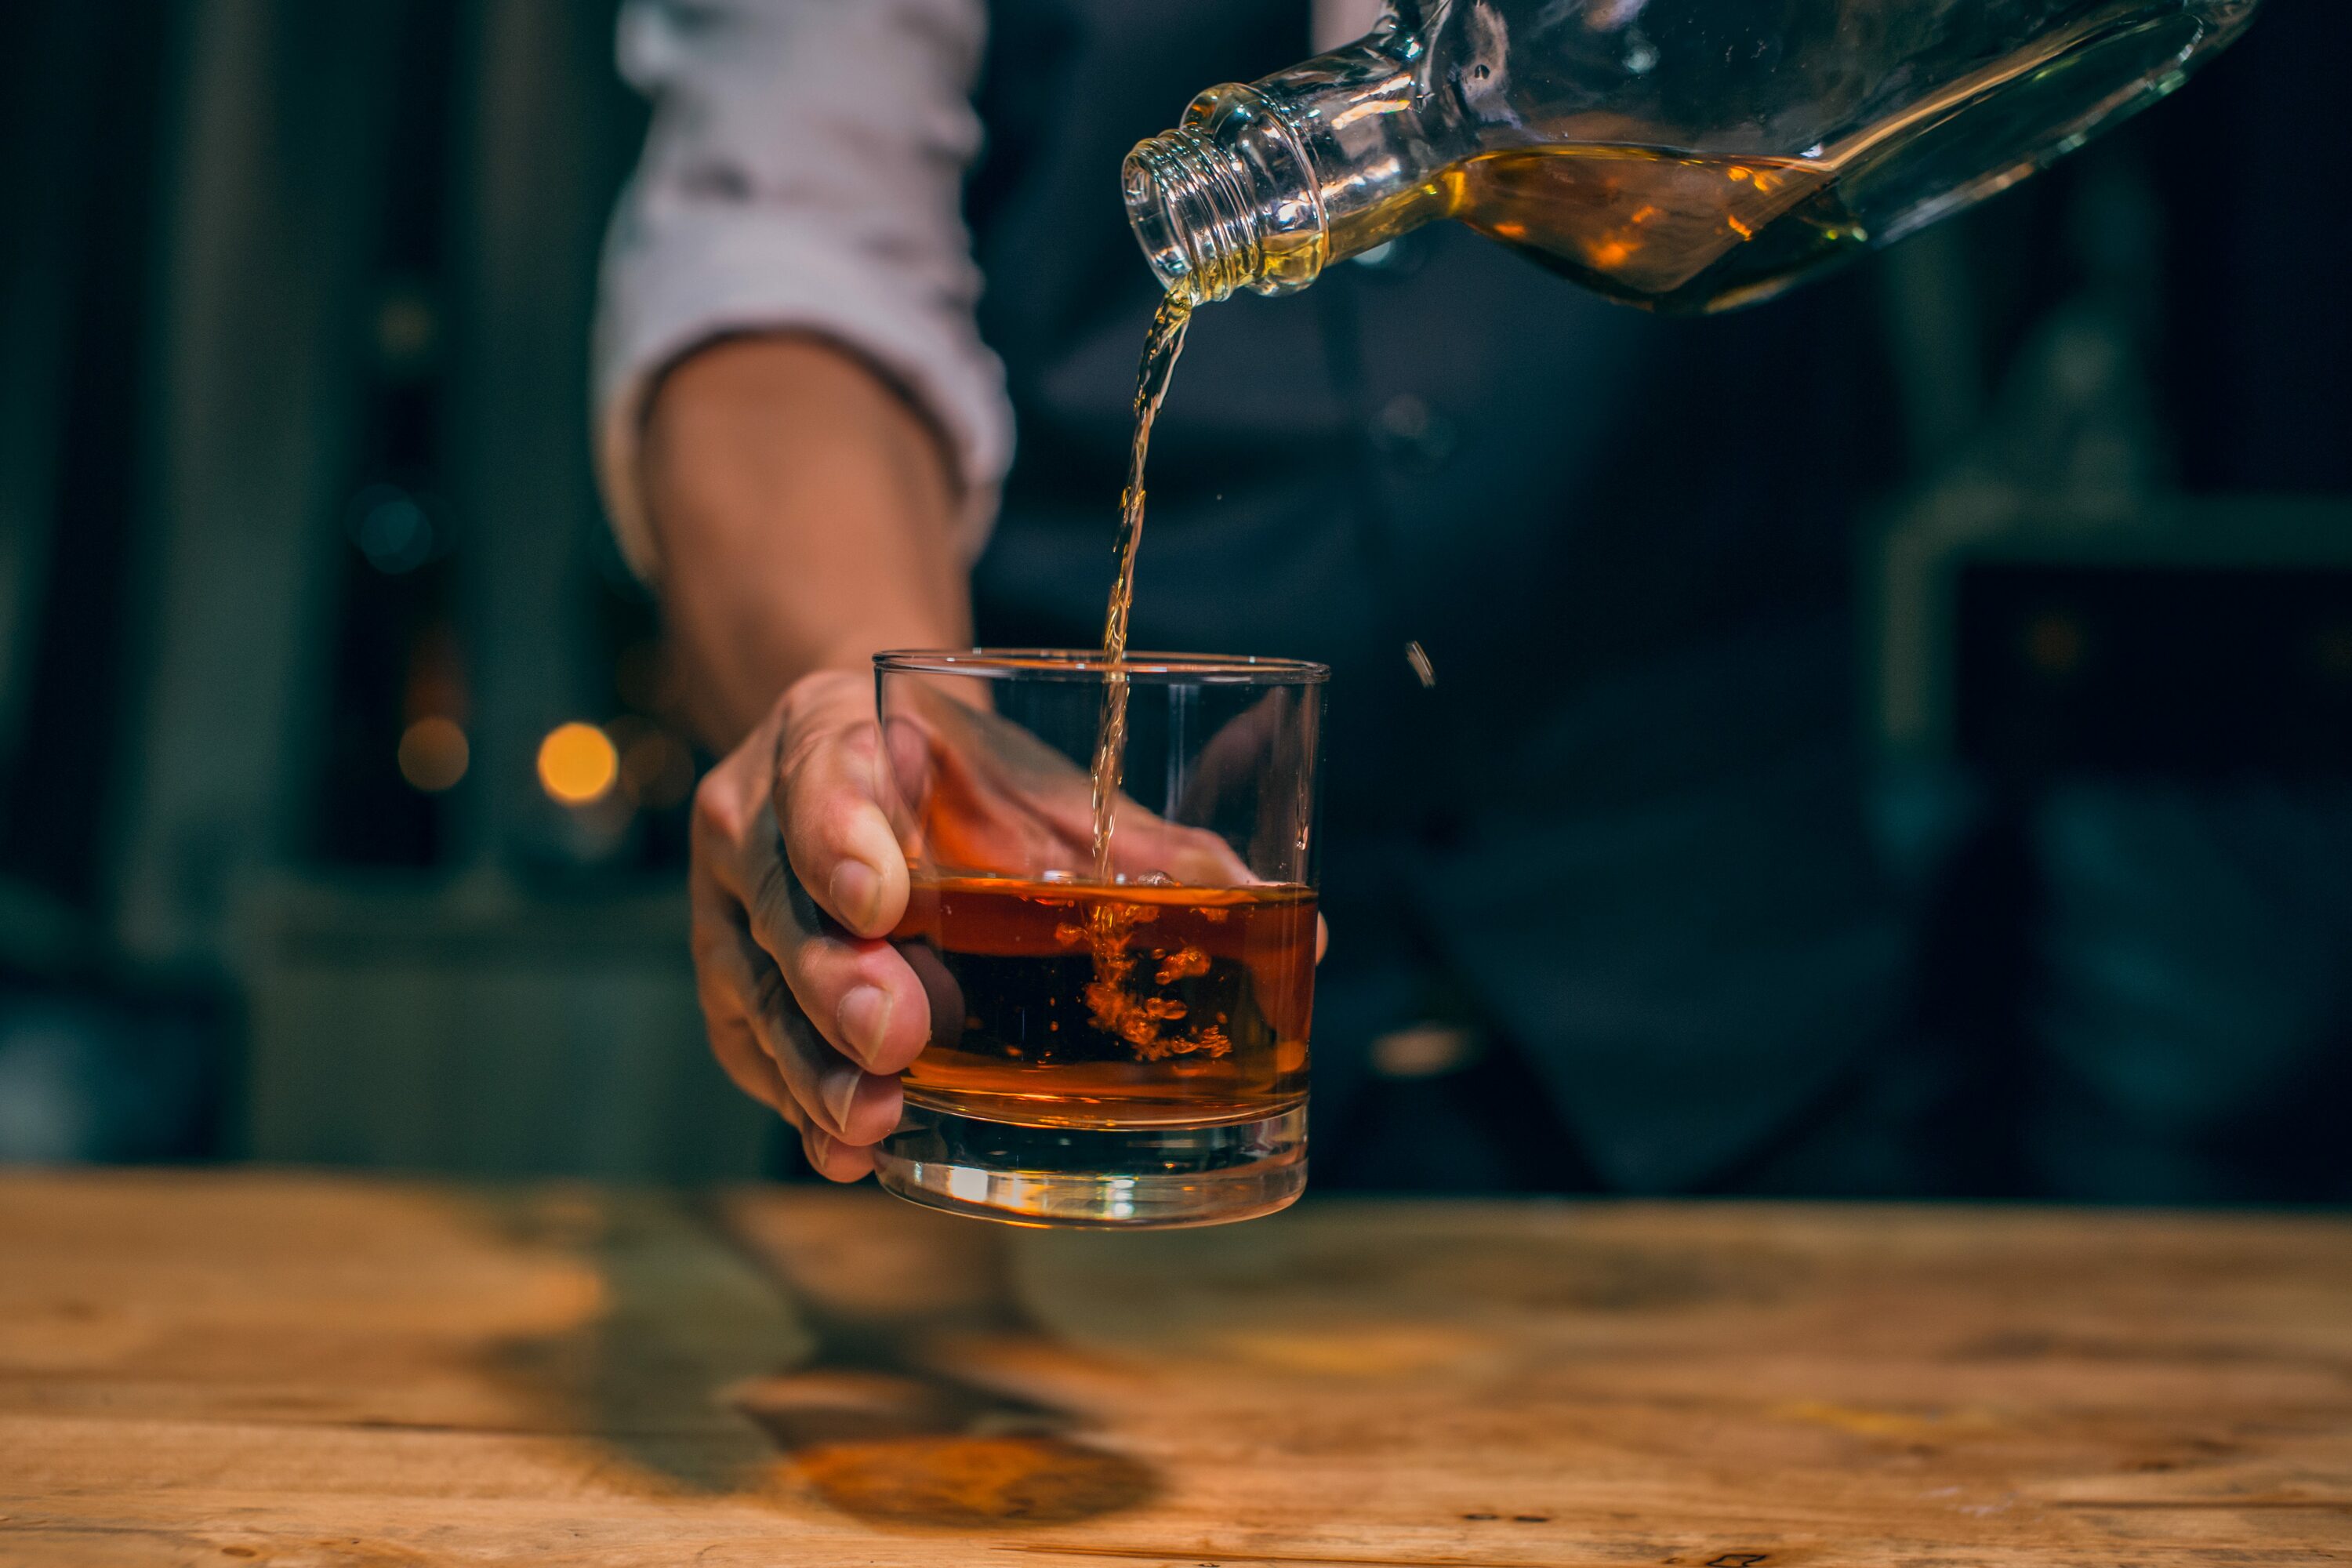 Chicago Winter Whiskey Tasting Festival Things to do in Chicago